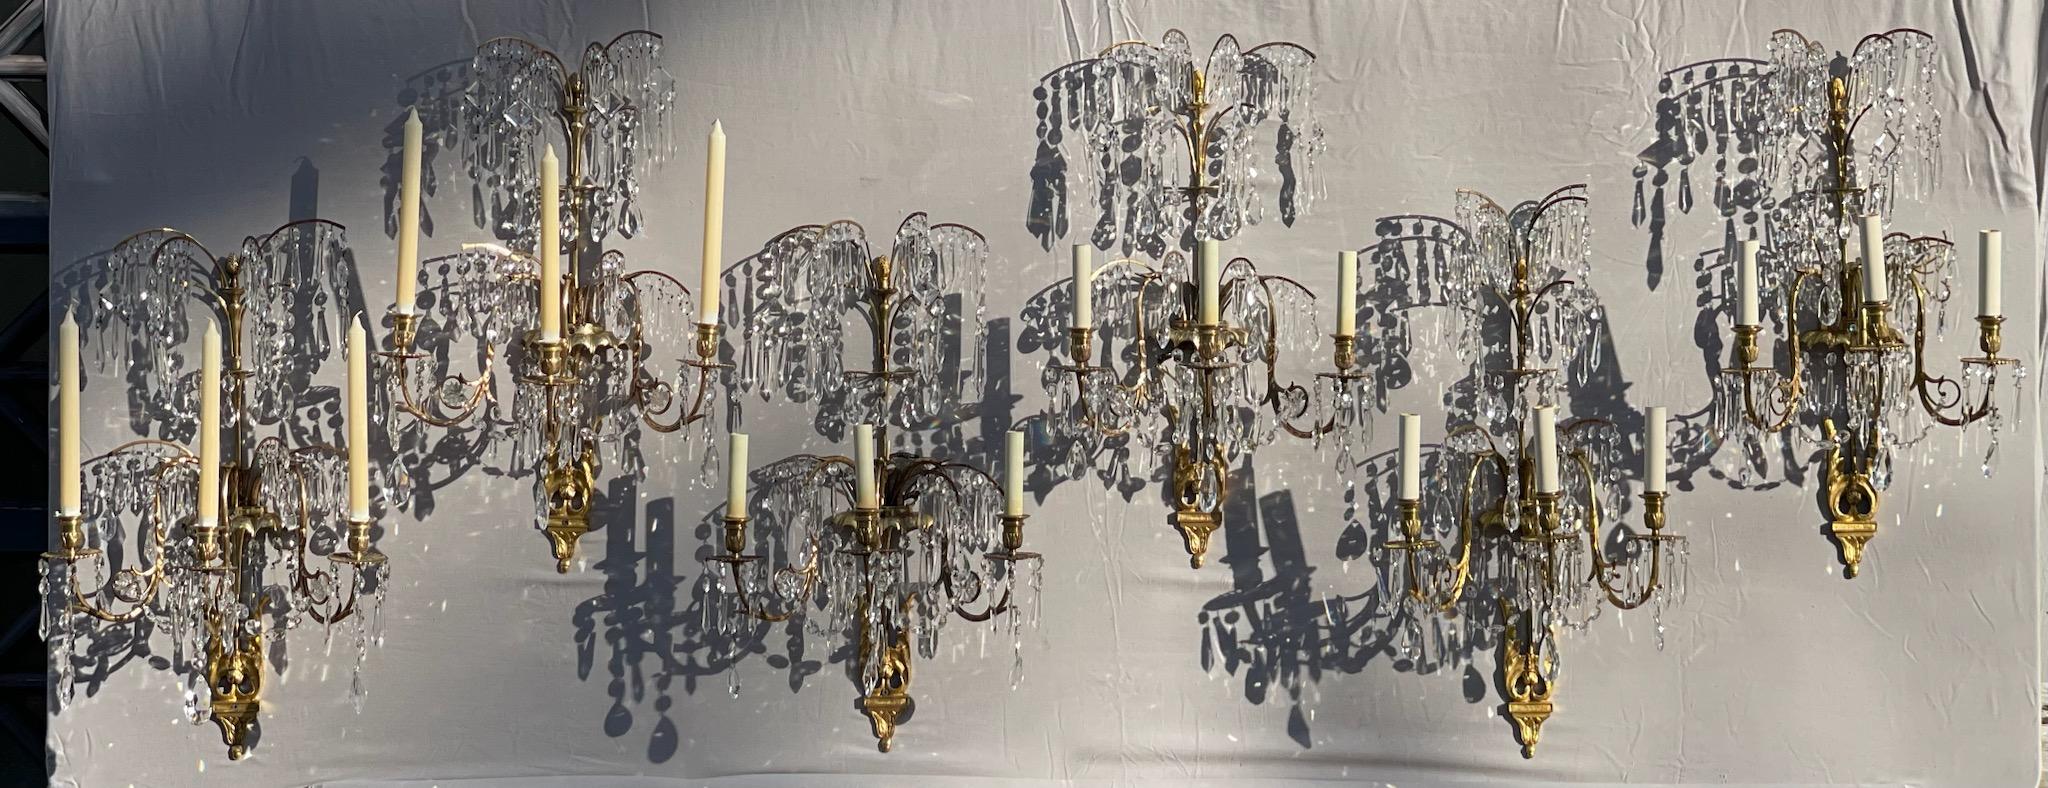 A rare find. Six Swedish Neo-Classical three arm gilt bronze and cut crystal wall sconces after German Designer and Architect Karl Friedrich Schinkel. Four have been French wired, two remain as candles. They came from a fine home in Manhattan.